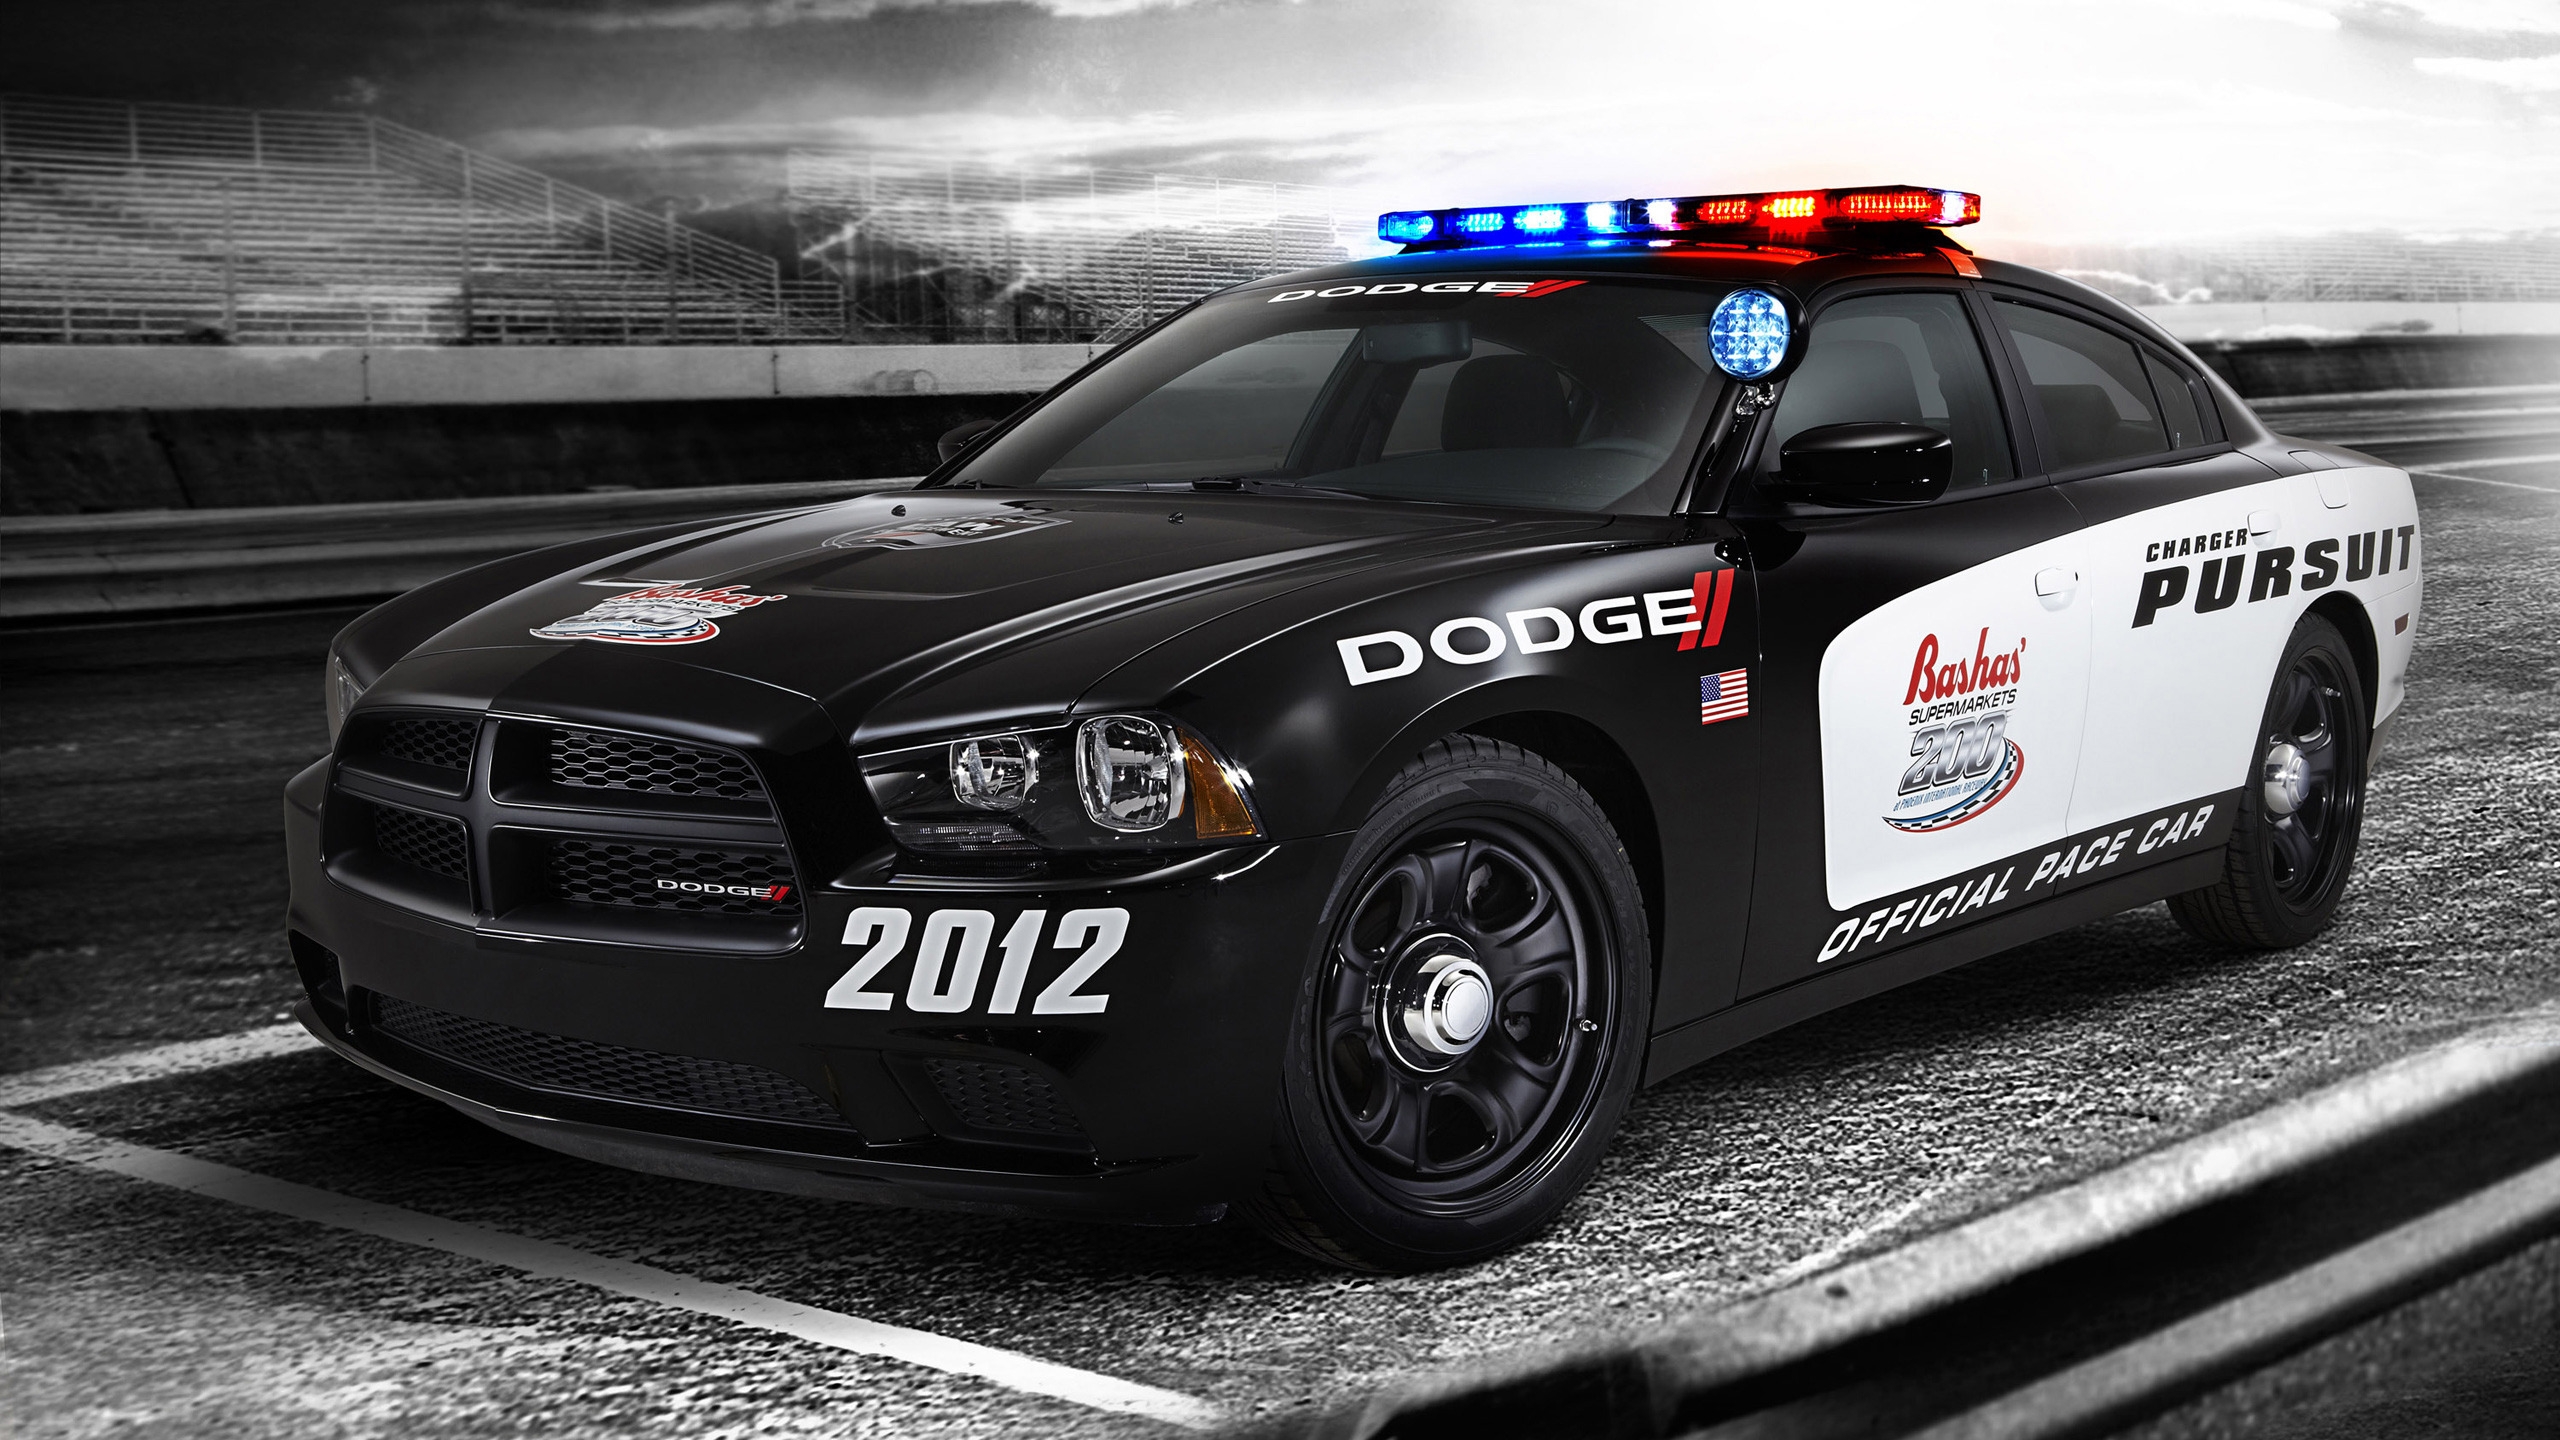 Dodge Charger Police for 2560x1440 HDTV resolution